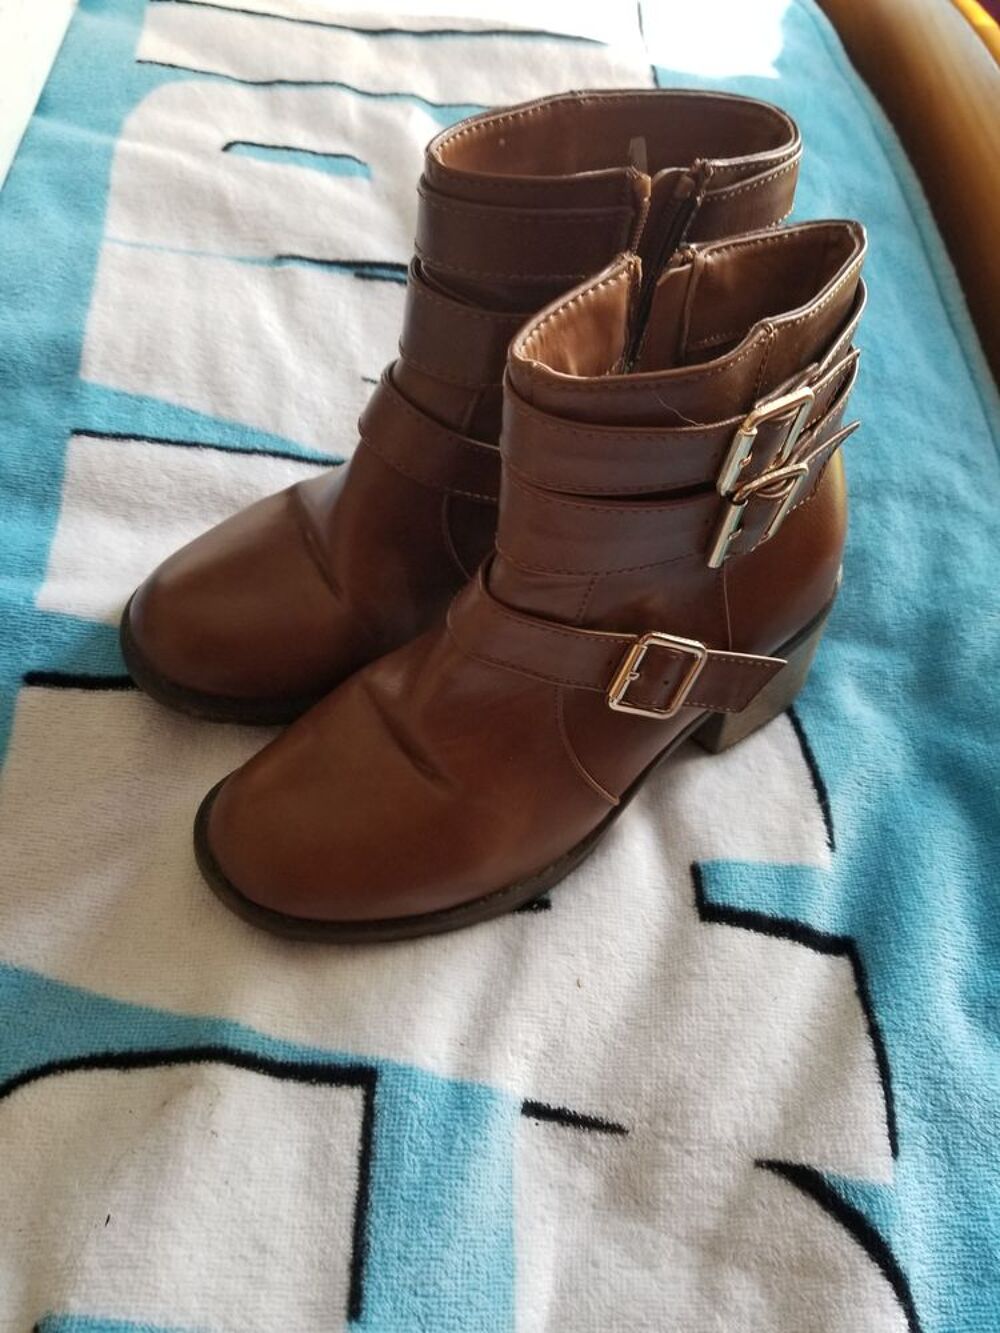 Bottines marrons Pointure 36 Chaussures